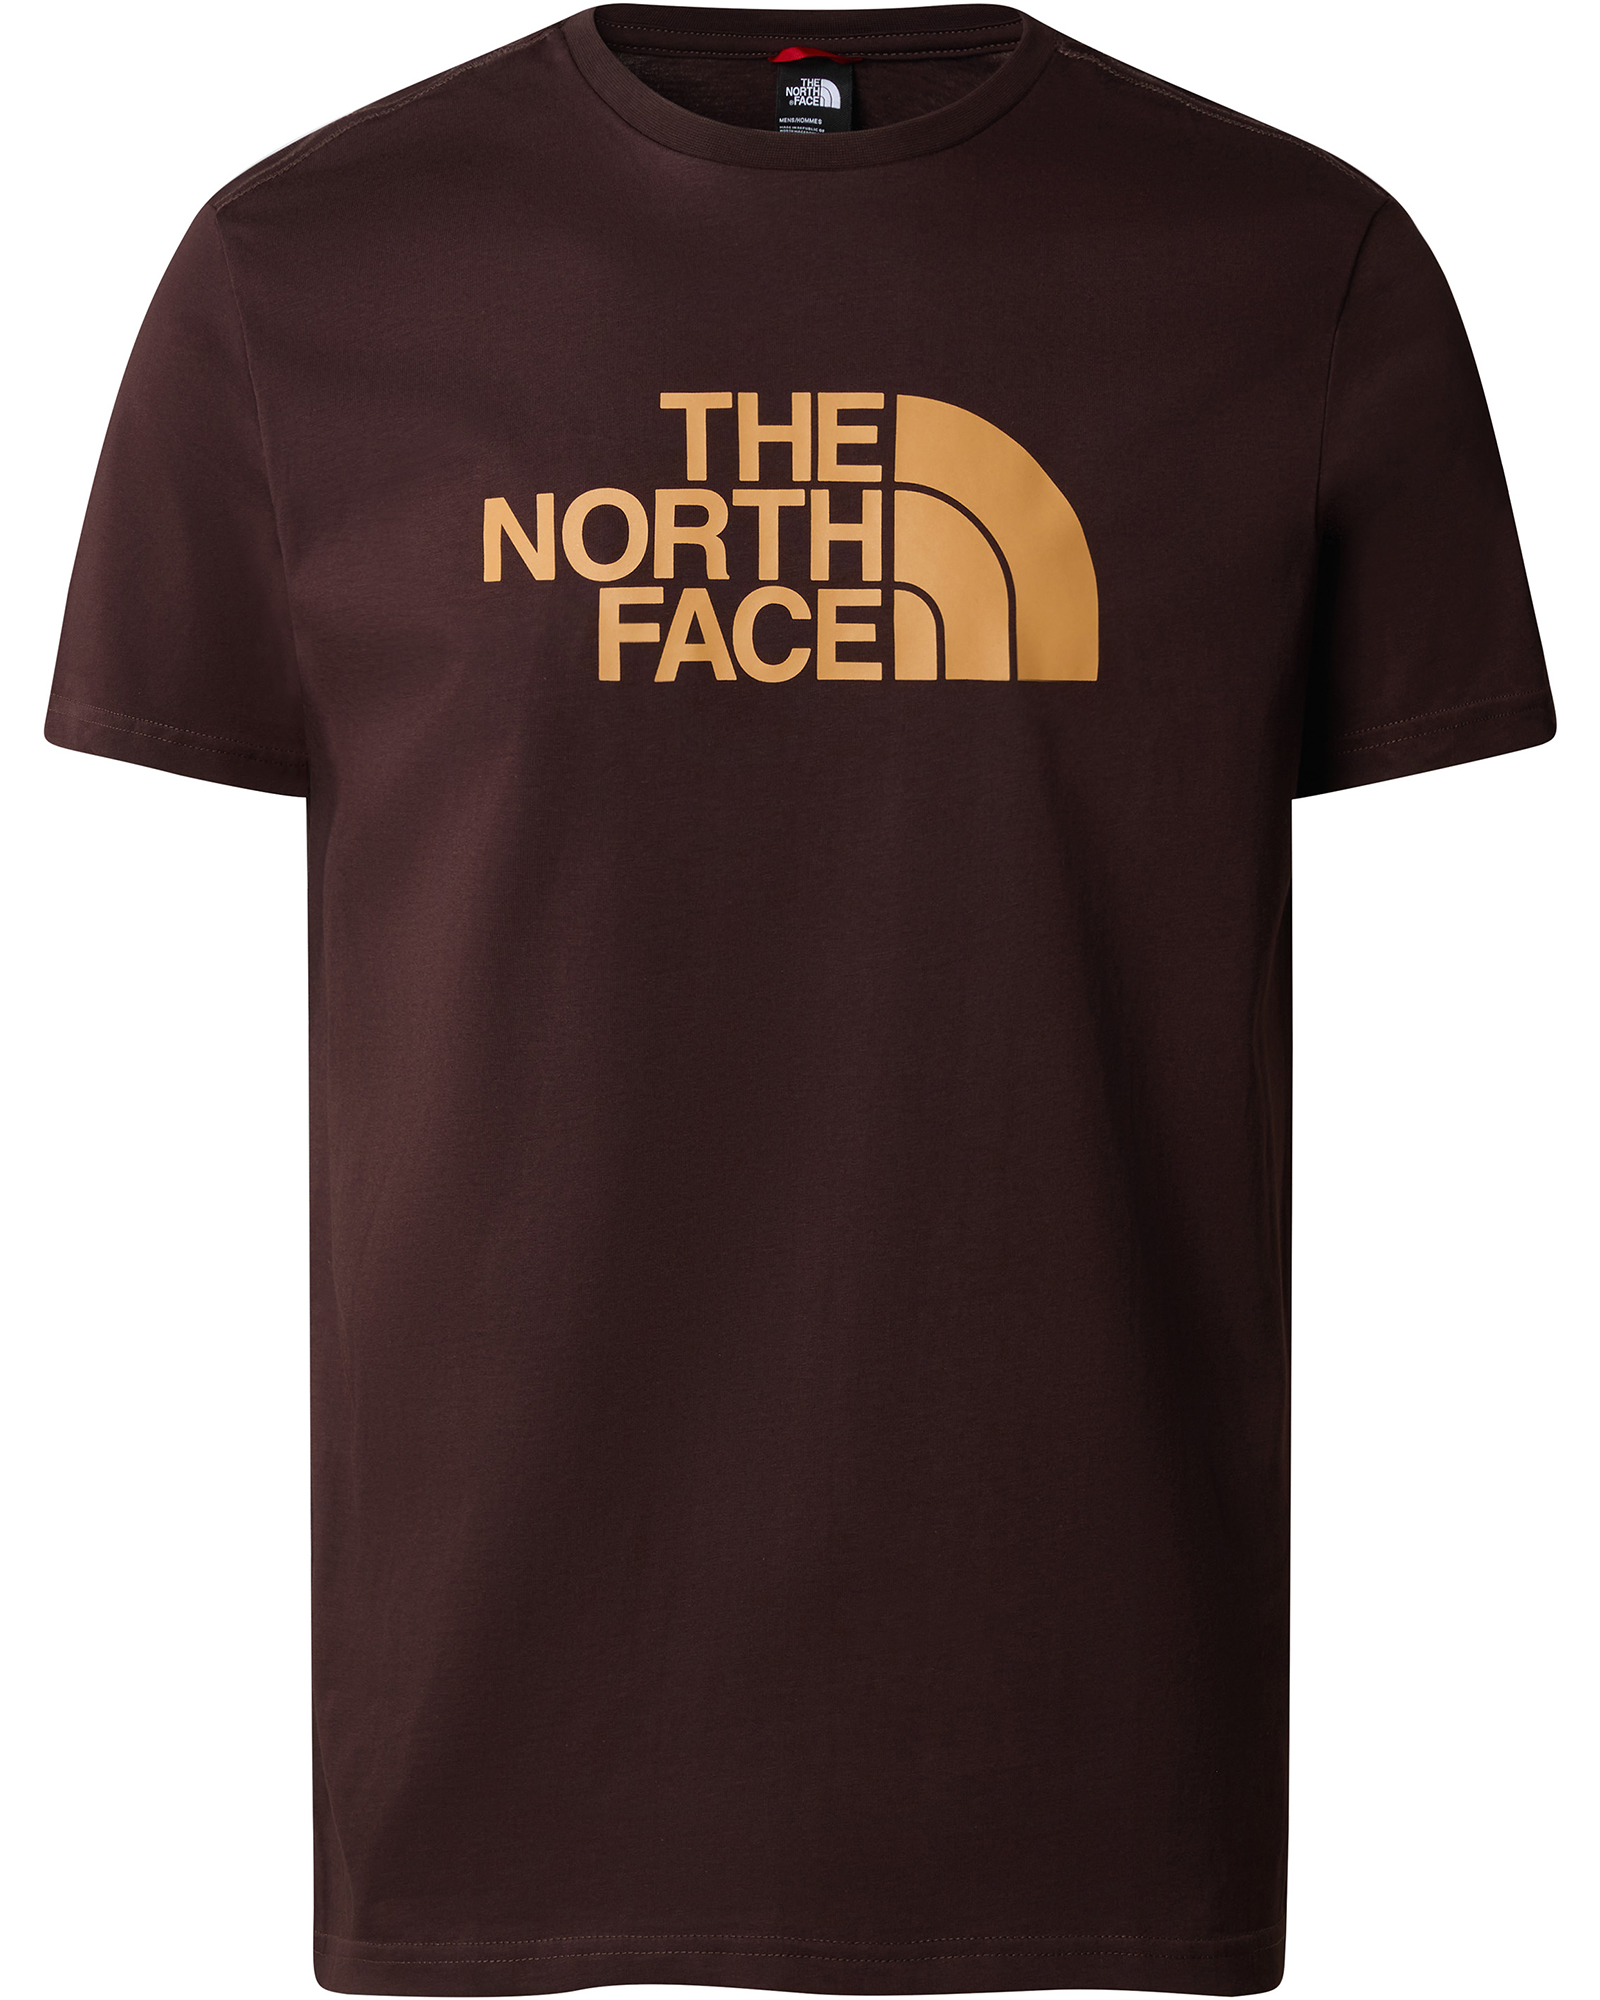 The North Face Easy Men’s T Shirt - Coal Brown-Almond Butter XL